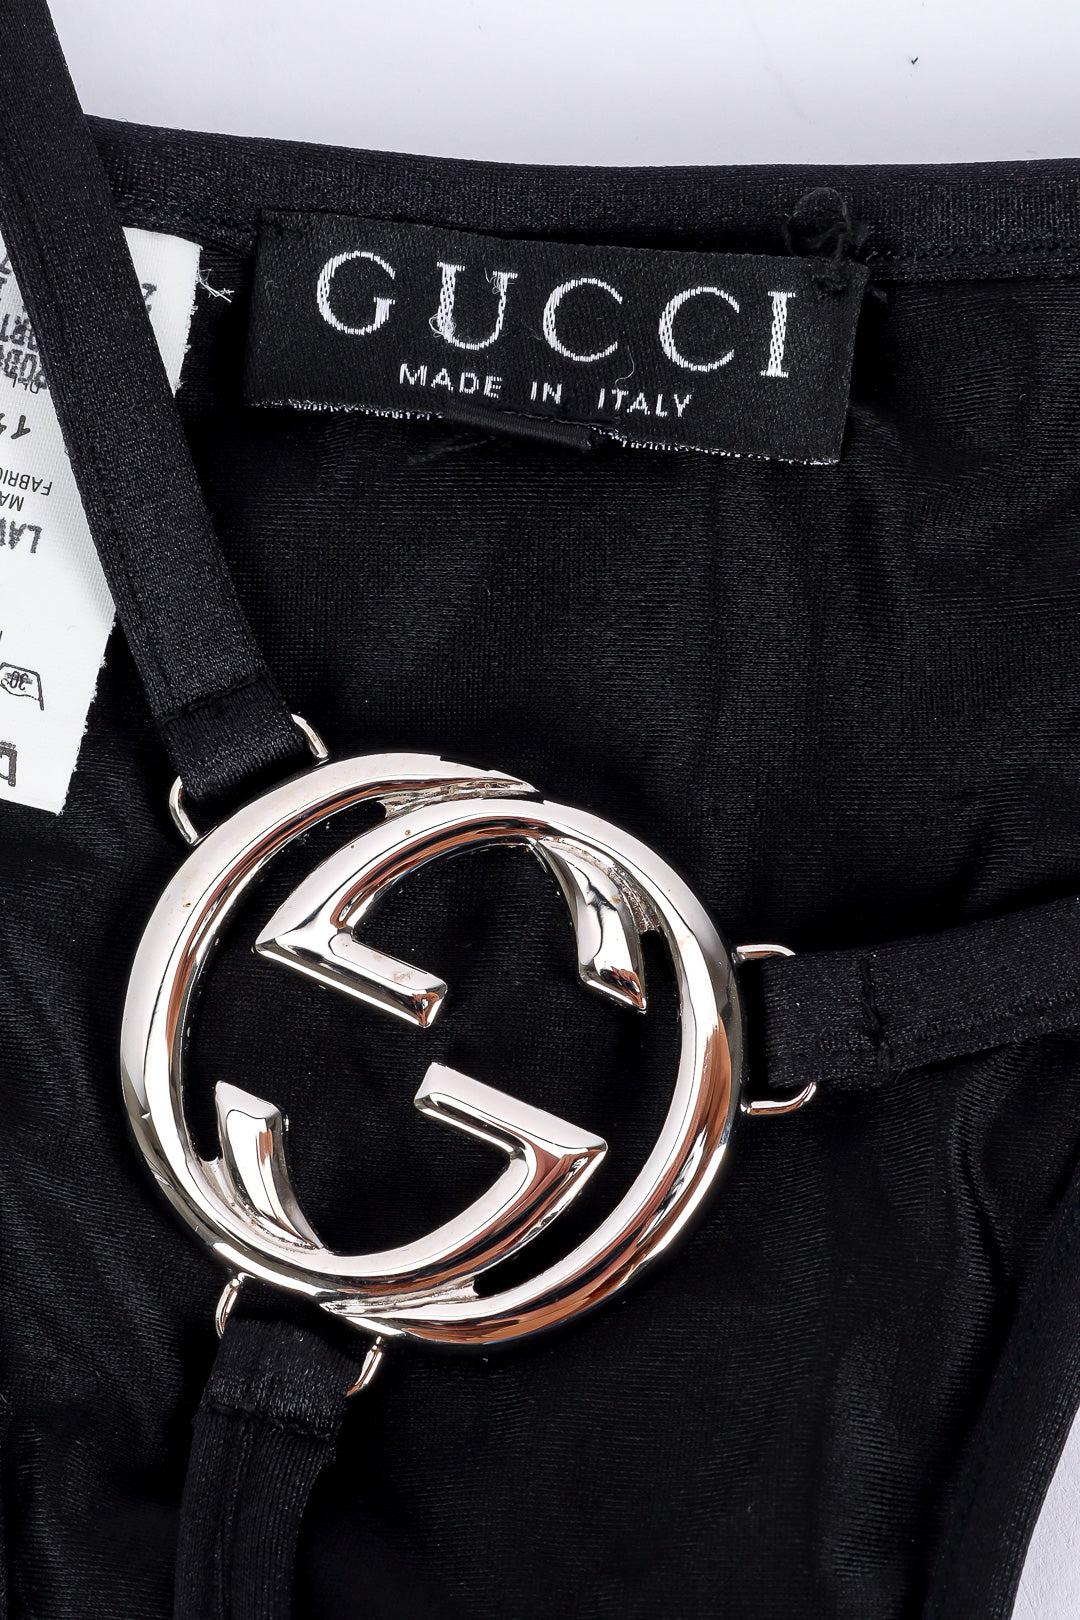 Black g-string by Tom Ford for Gucci label and emblem @recessla